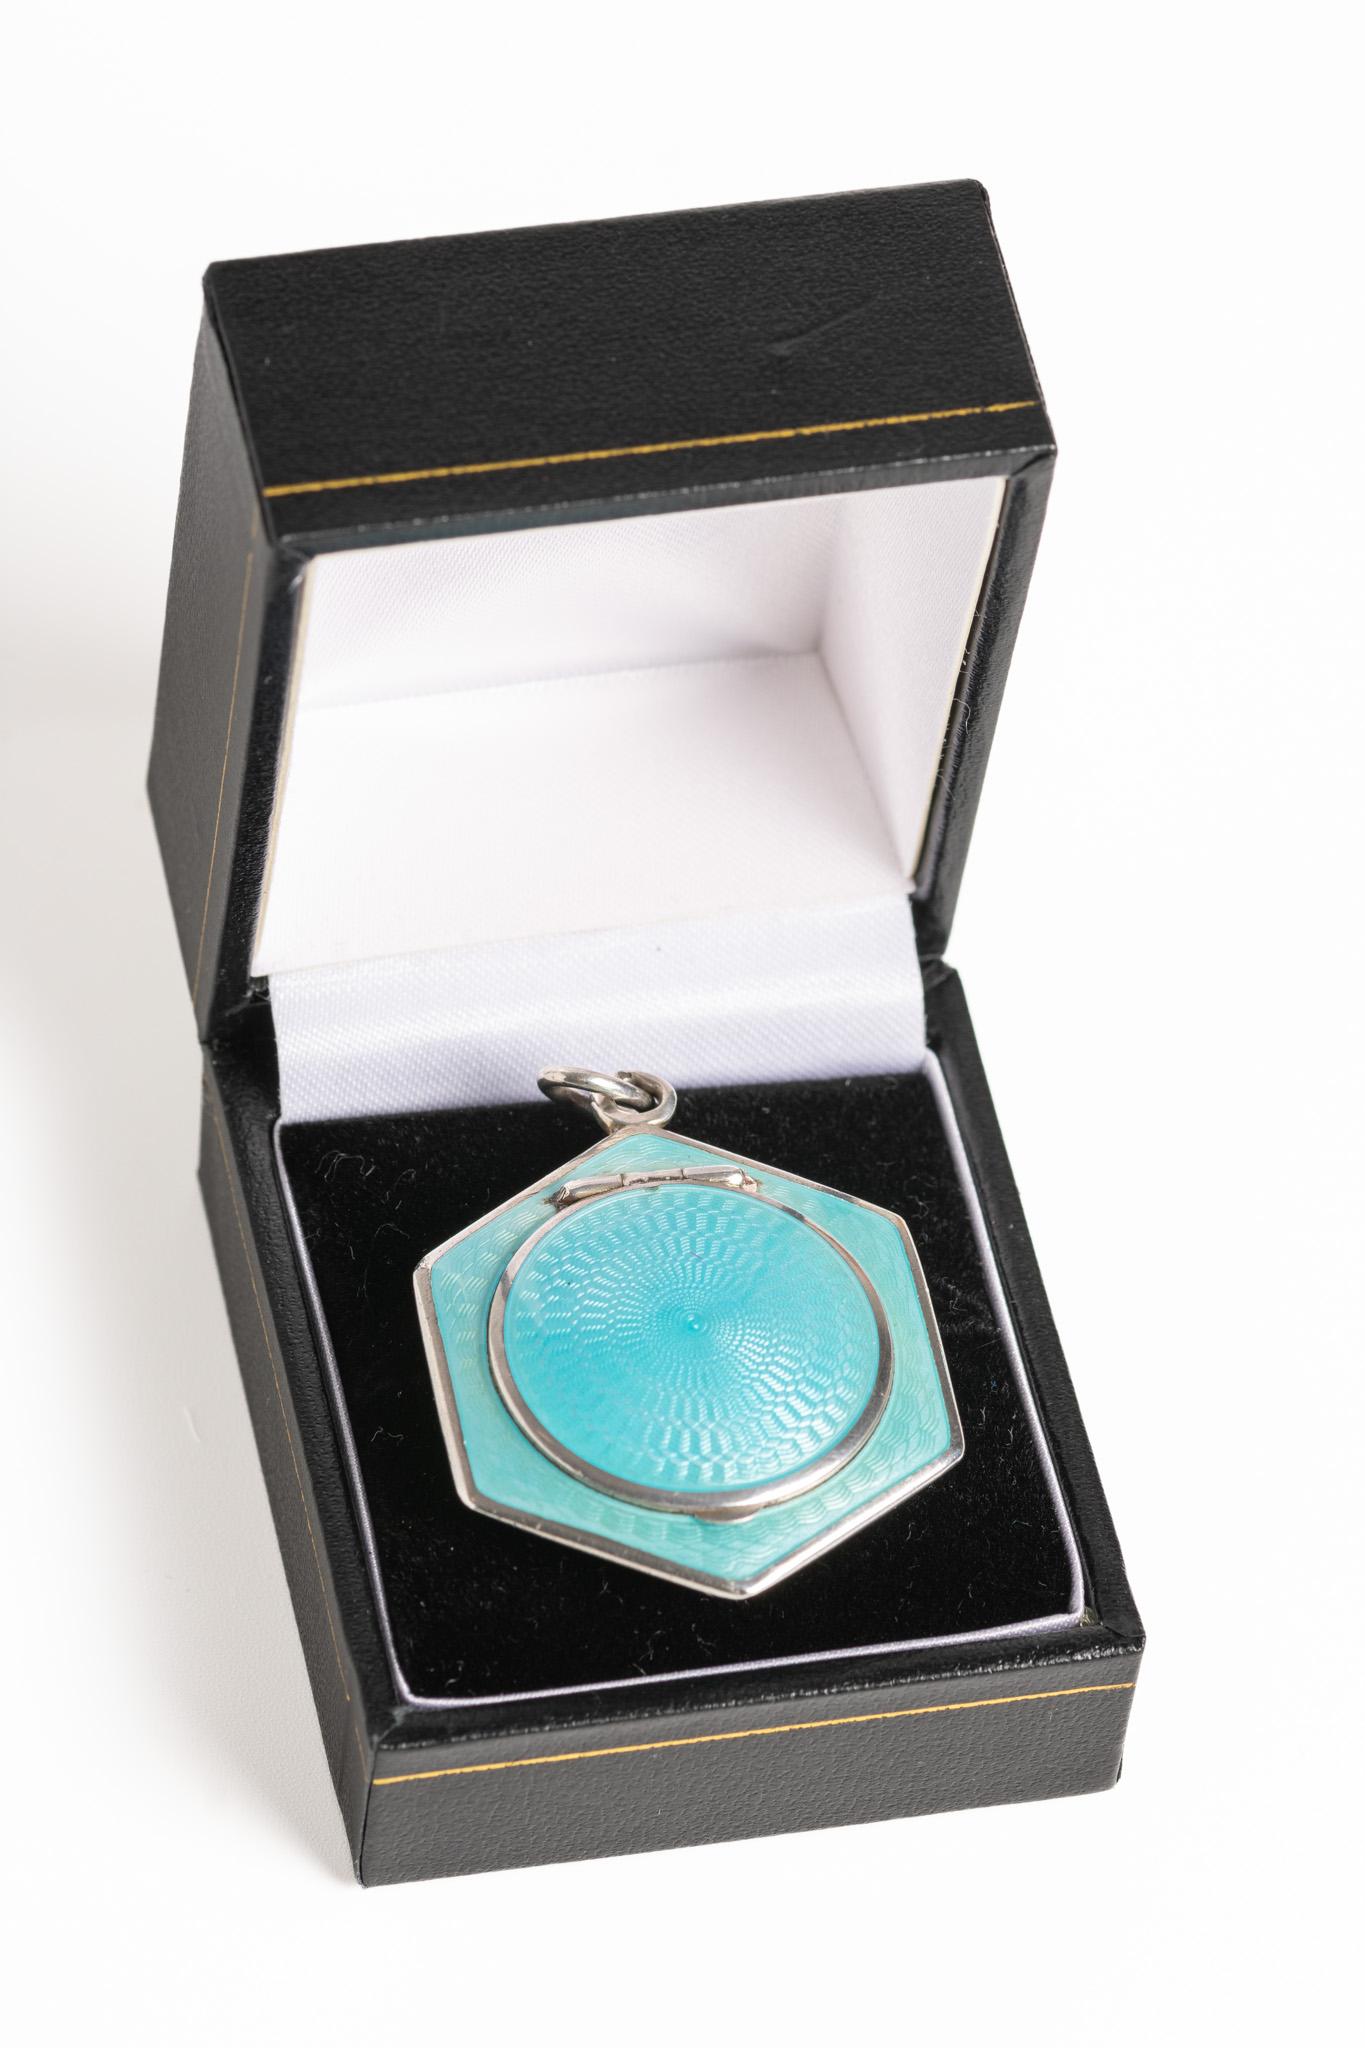 A magnificent and rare Austrian Art Deco blue guilloche enamel and silver gilt mirror hexagonal locket. This beautiful piece is made in aqua blue guilloche enamel with a silver gilded interior. The locket has a lovely, small mirror inside and it's